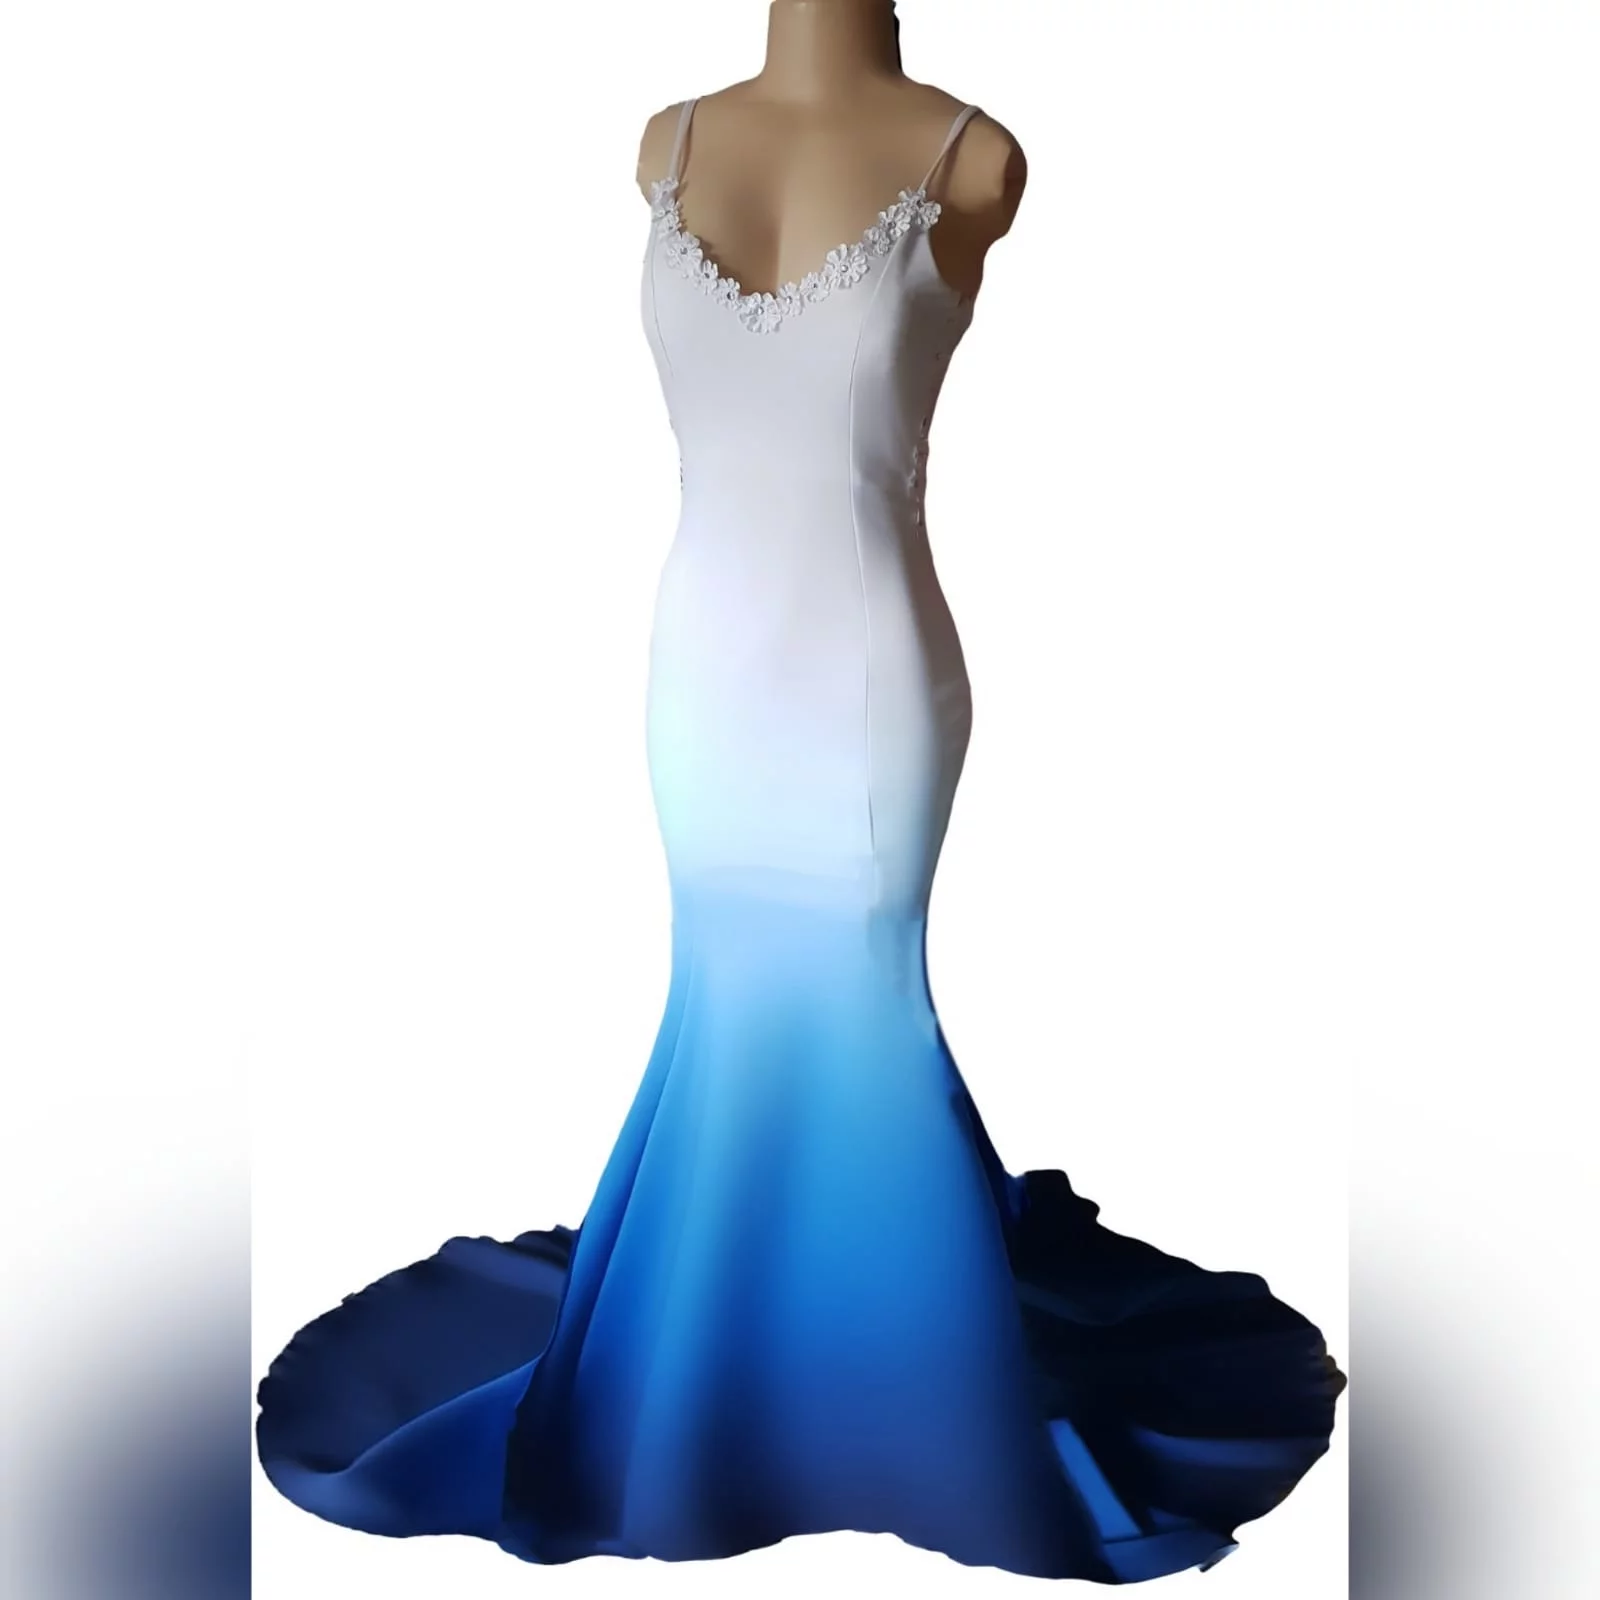 Blue and white ombre mermaid dress with a train 3 <blockquote>"don't you ever let a soul in the world tell you that you can't be exactly who you are" lady gaga</blockquote> a famous design of mine loved by many, created for another client? Blue and white ombre mermaid dress with a train. With a low back covered in a translucent lace. Sweetheart neckline with thin shoulder straps, neckline detailed with lace and a touch of beads.